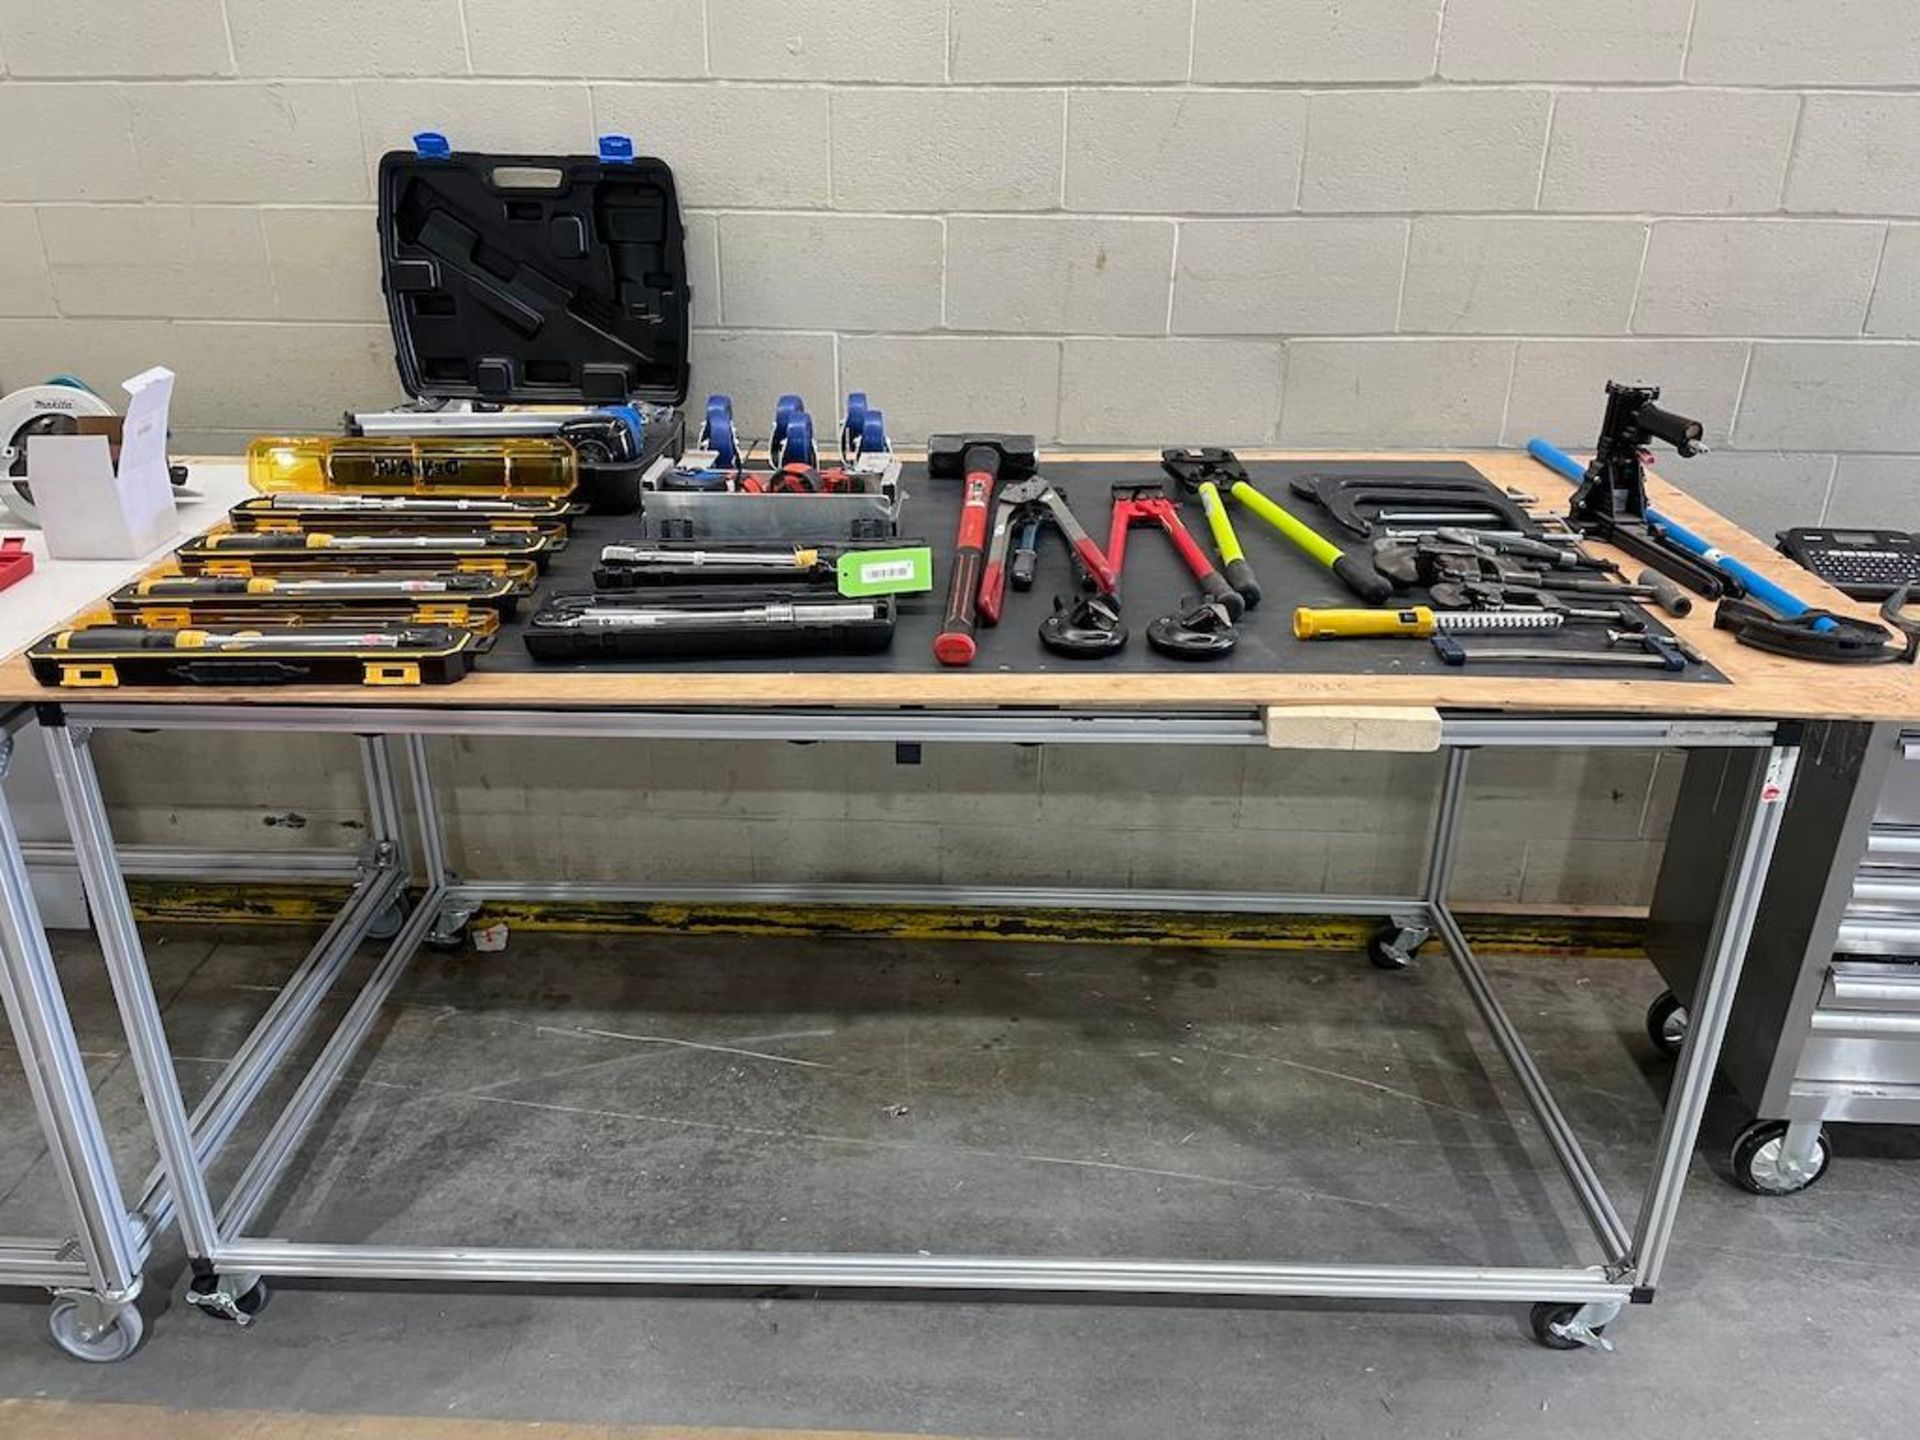 LOT: ASSORTED TOOLS, TORQUE WRENCHES, NAIL GUN, CASTERS [TROIS RIVIERES] *PLEASE NOTE, EXCLUSIVE RIG